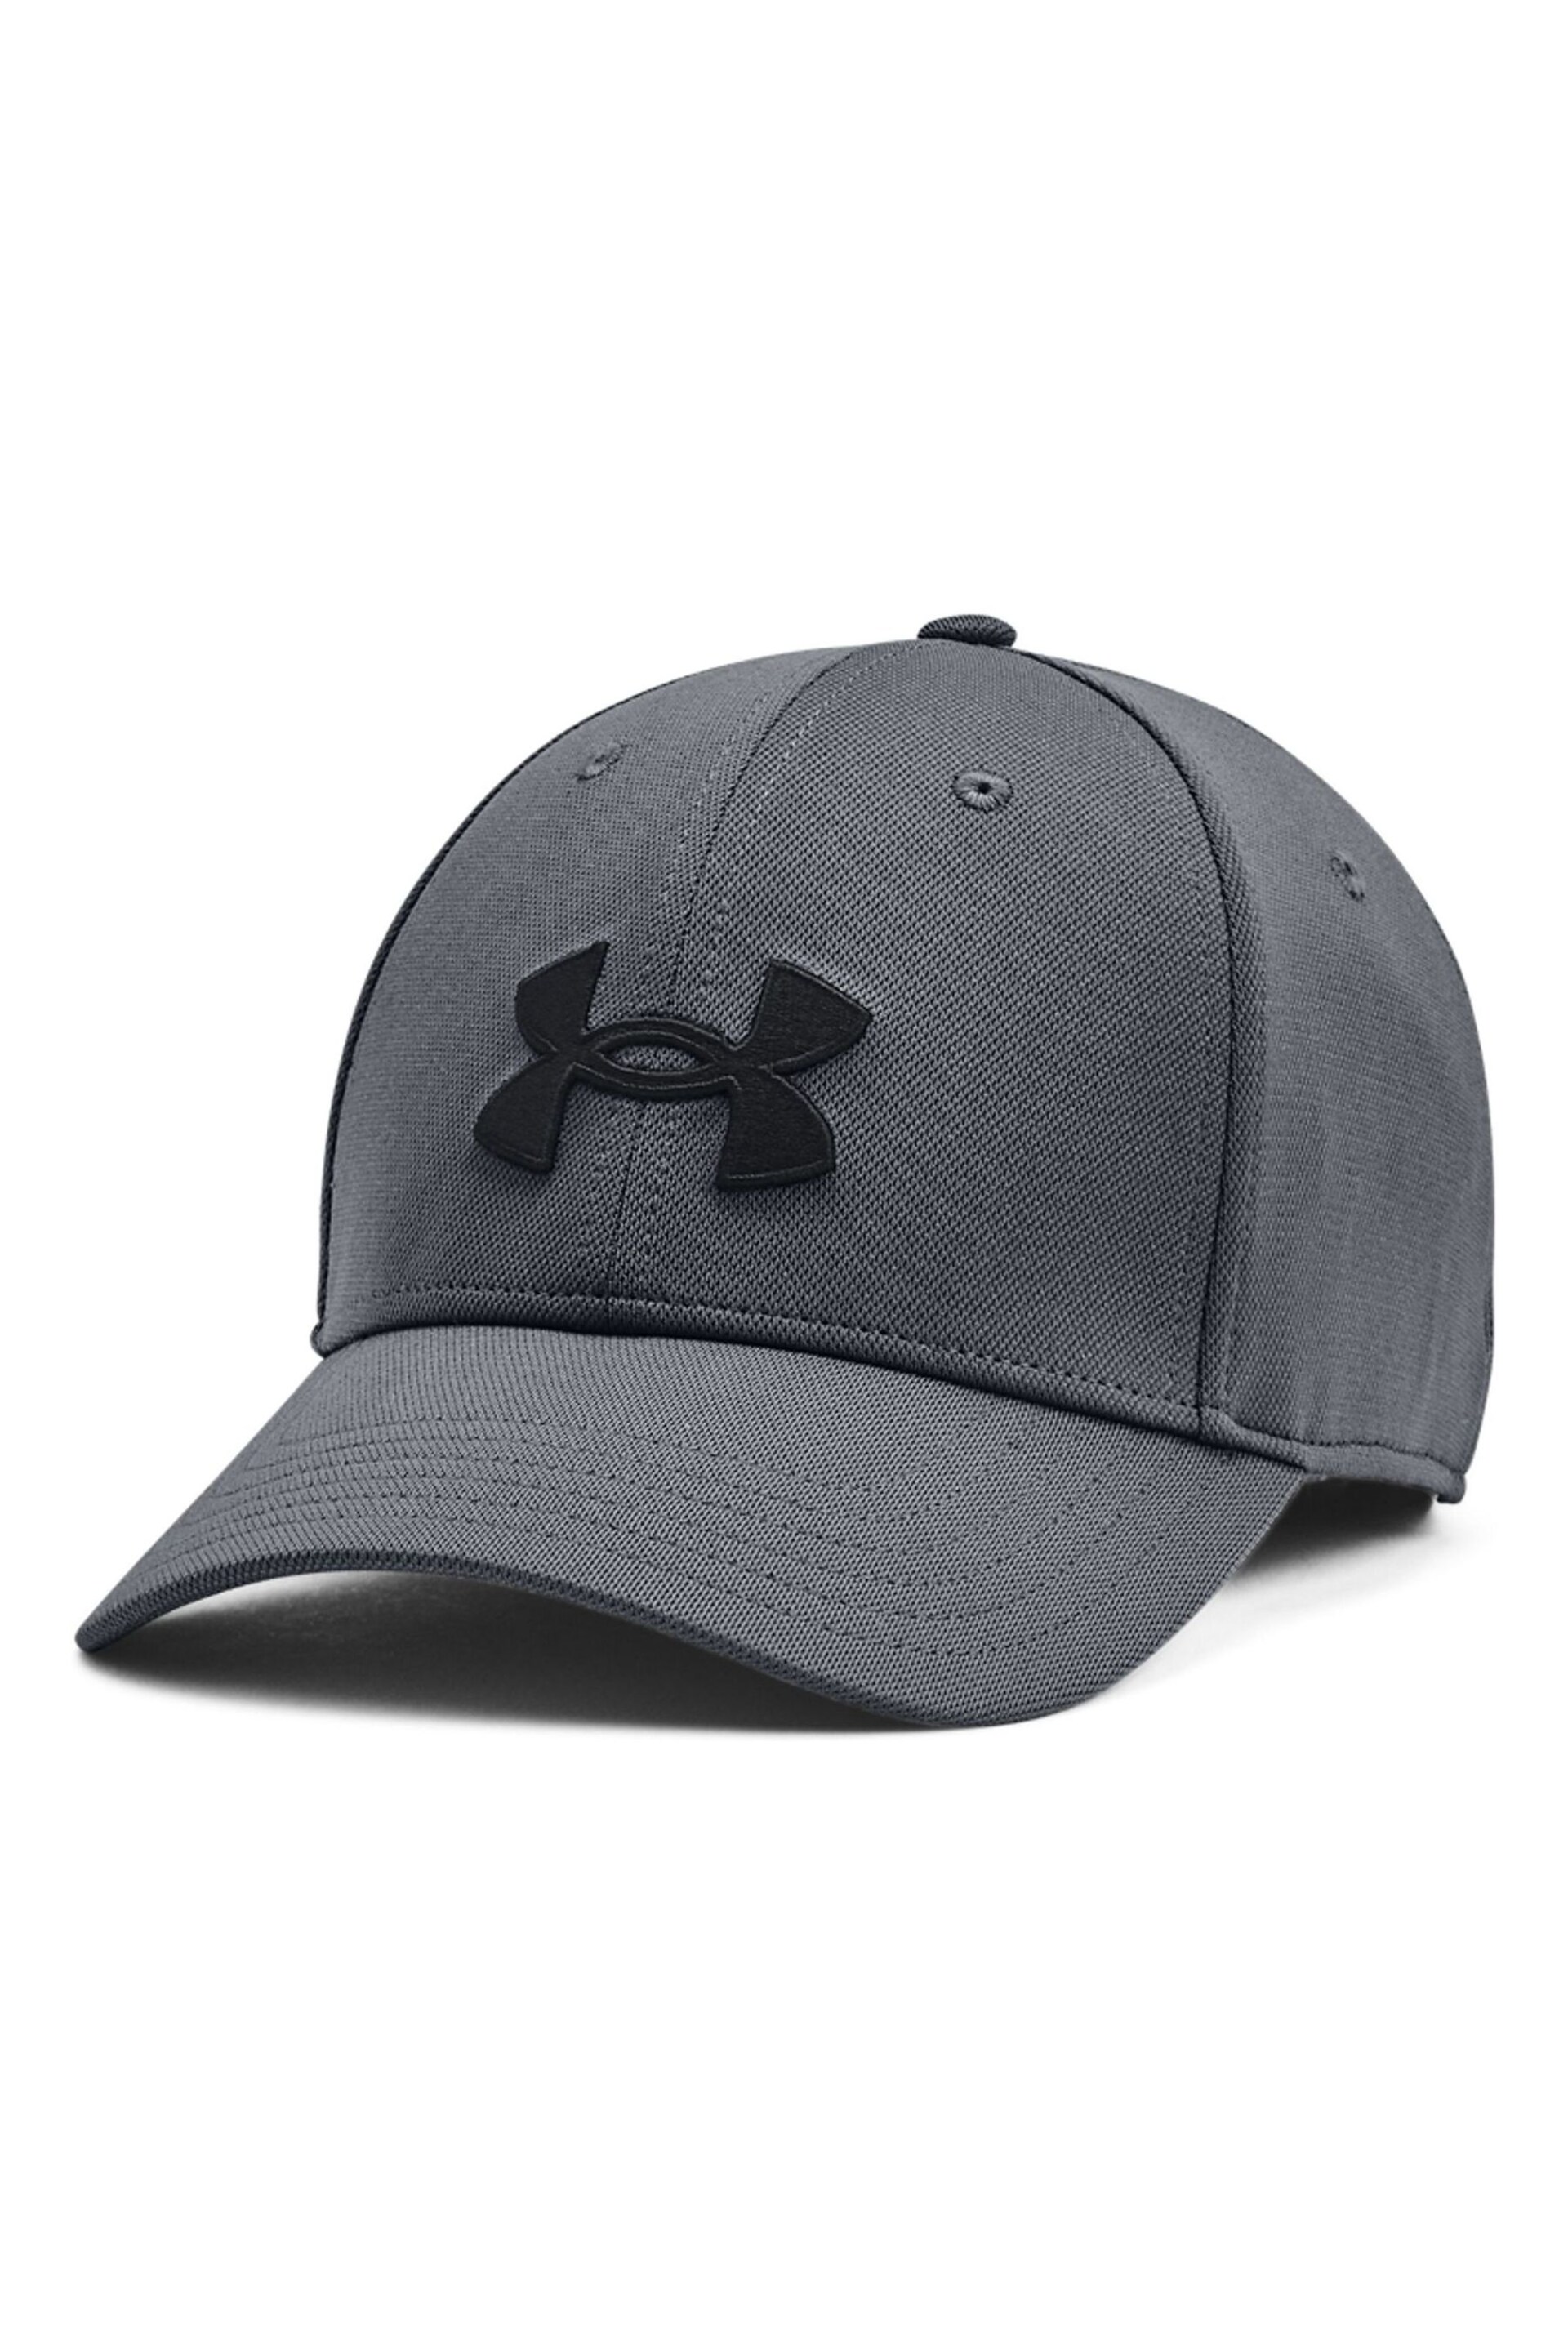 Under Armour Grey Blitzing Adjustable Cap - Image 1 of 3